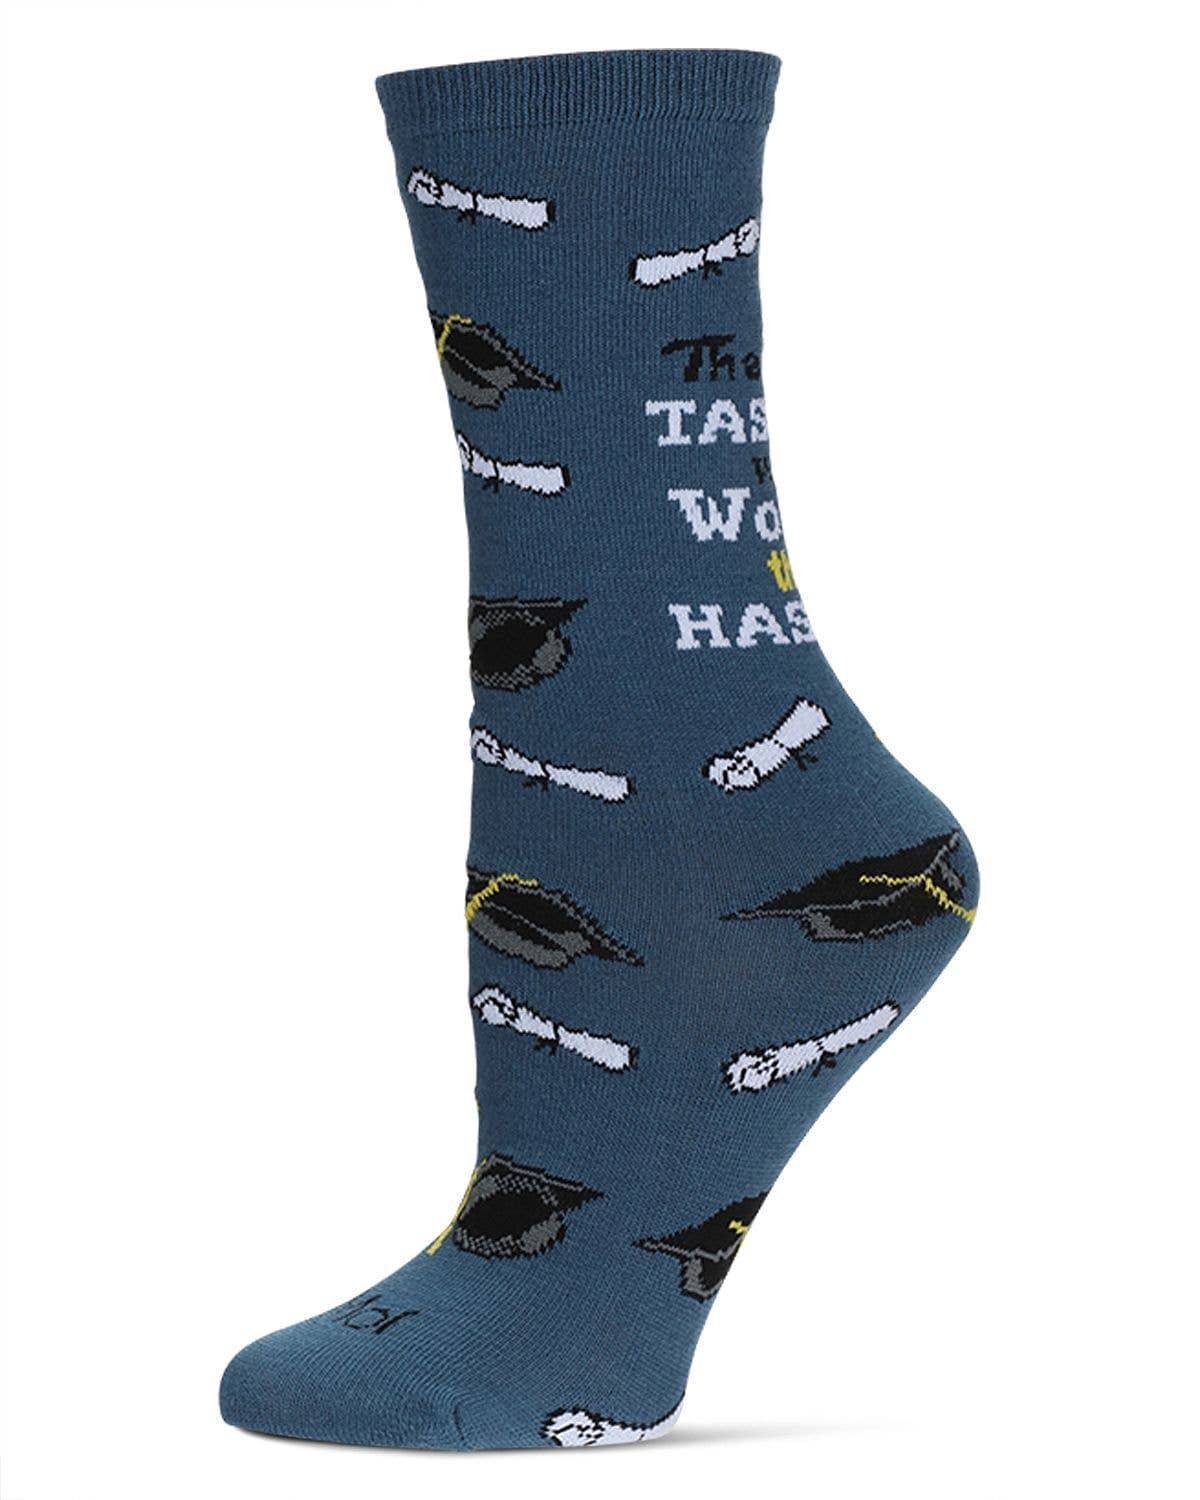 Women's The Tassel Was Worth The Hassle Greeting Card Socks: OS / Blue Nights